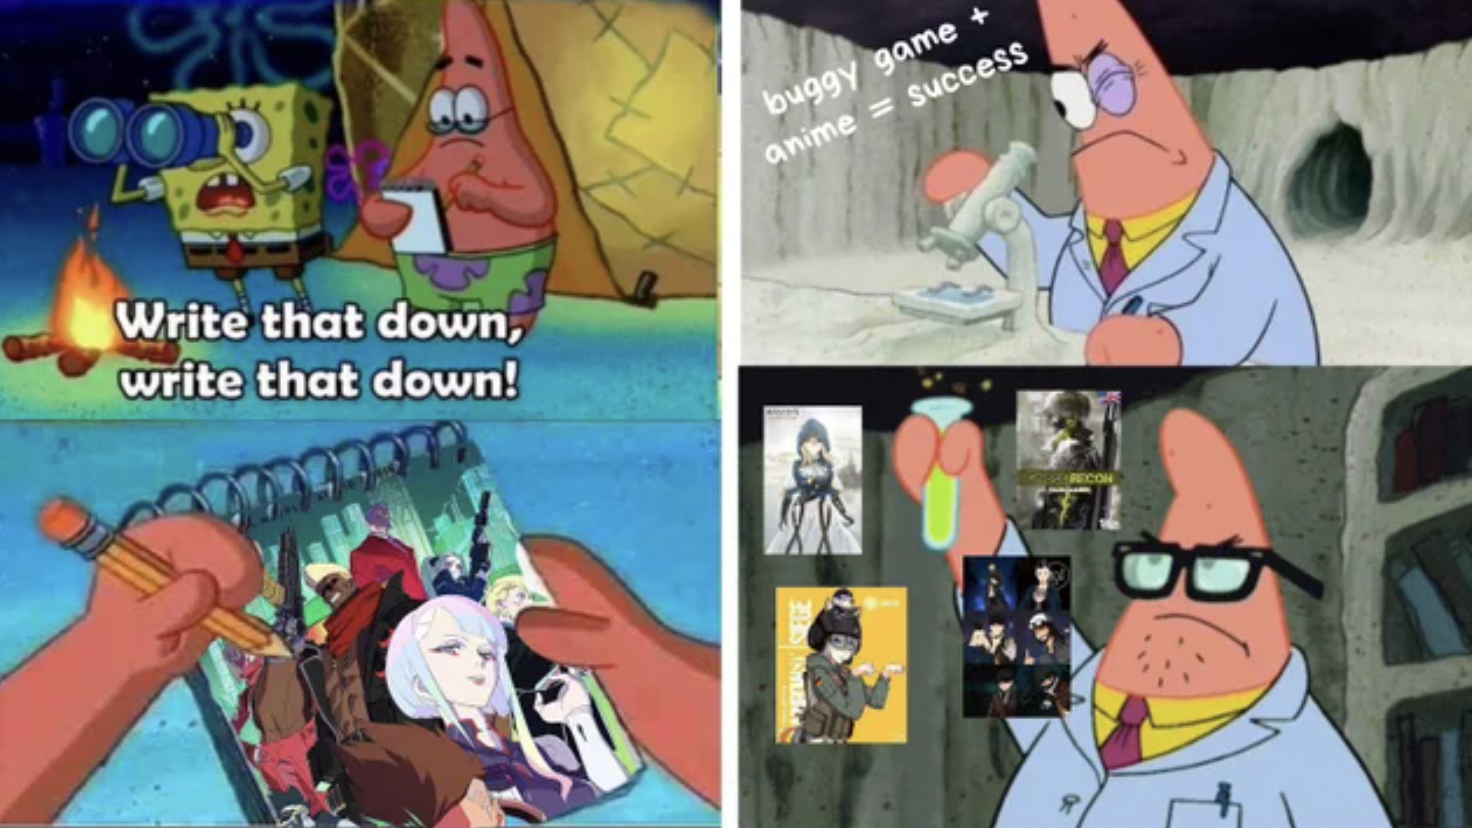 Gaming memes - patrick star - Write that down, write that down! buggy game anime success